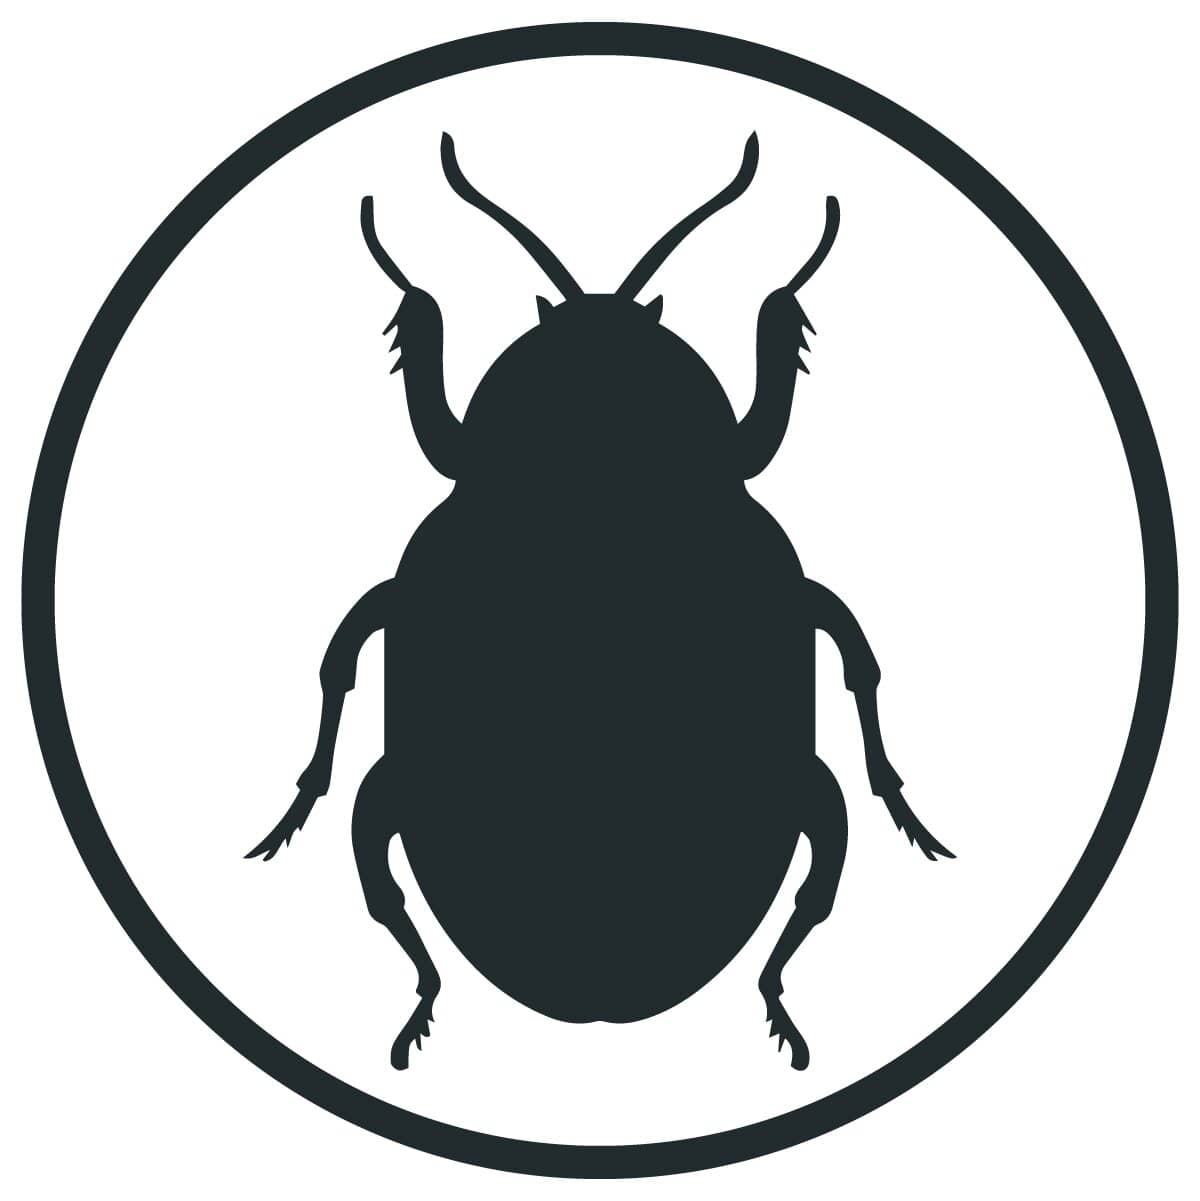 carpet beetles pest control service in sydney for homes and businesses